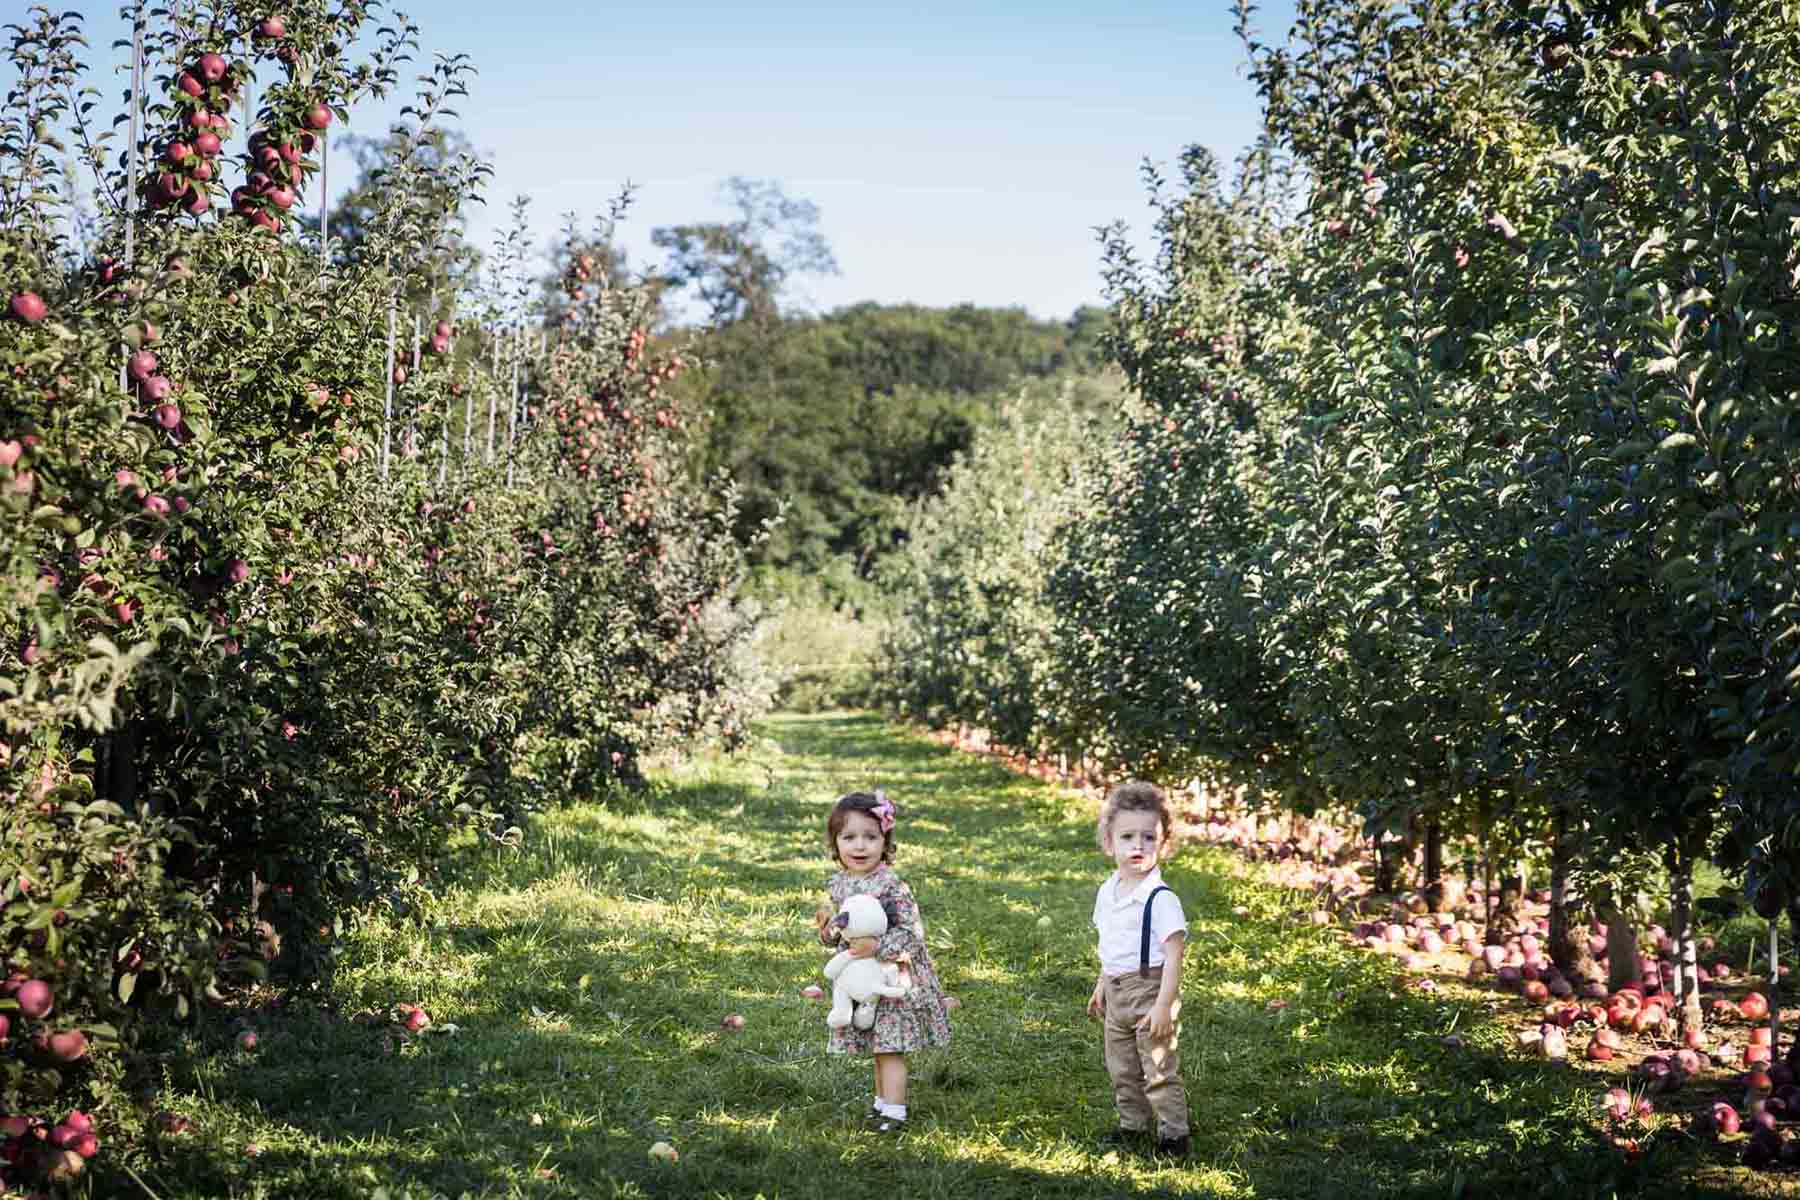 Two toddlers in an apple orchard for an article on tips for apple picking family photos